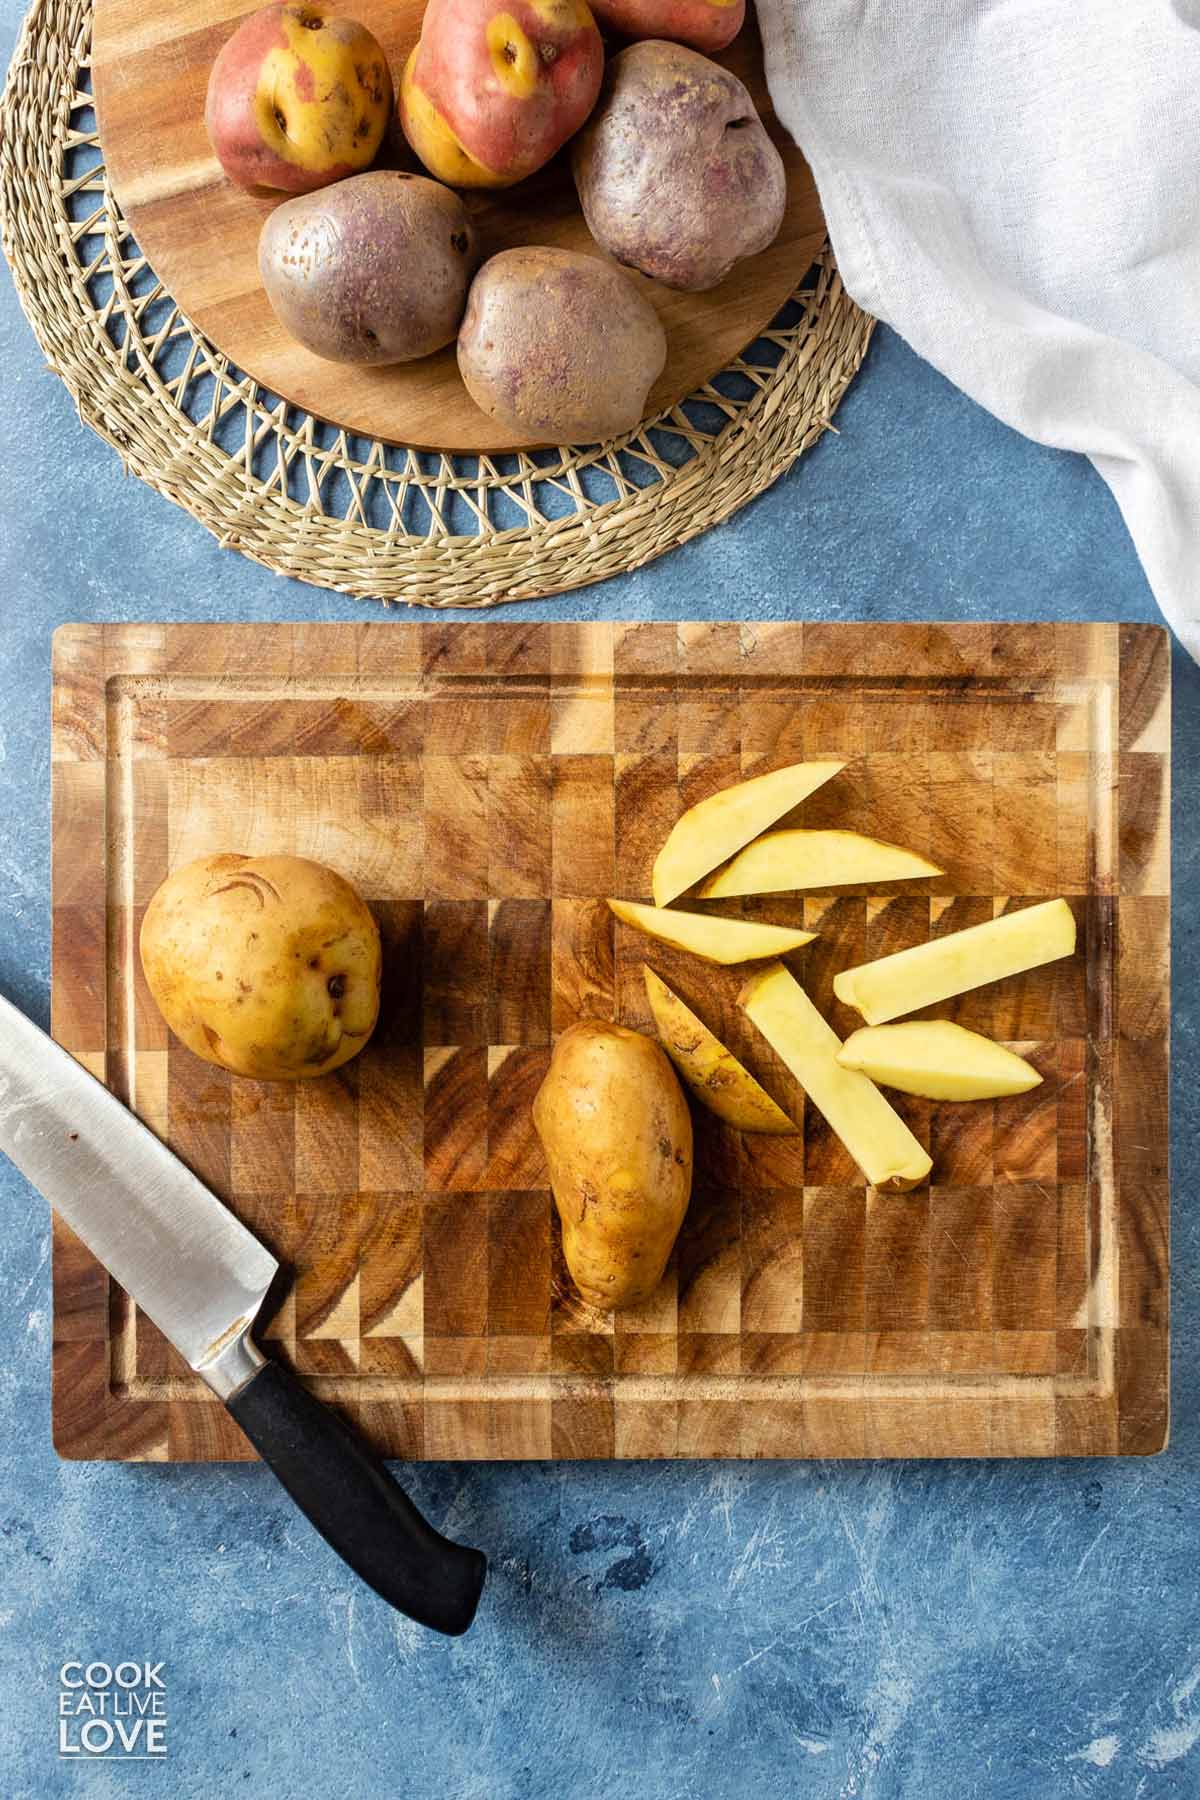 Potatoes cut into thick cut fries.